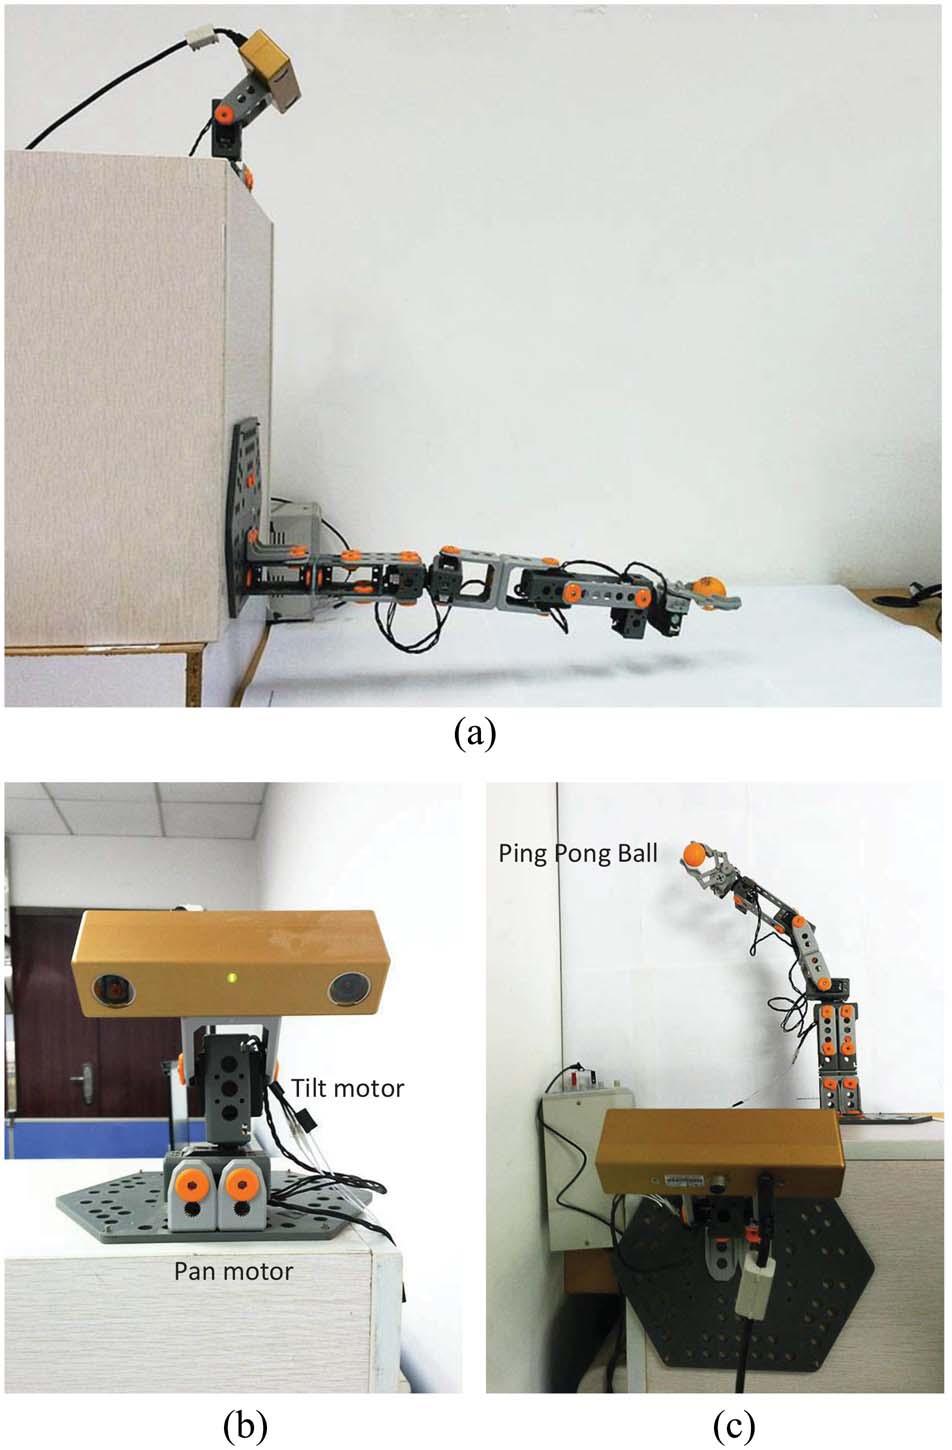 386 IEEE TRANSACTIONS ON COGNITIVE AND DEVELOPMENTAL SYSTEMS, VOL. 10, NO. 2, JUNE 2018 Fig. 2. Top-down view of the robot s arm. (a) Positions of the three joints and the gripper.